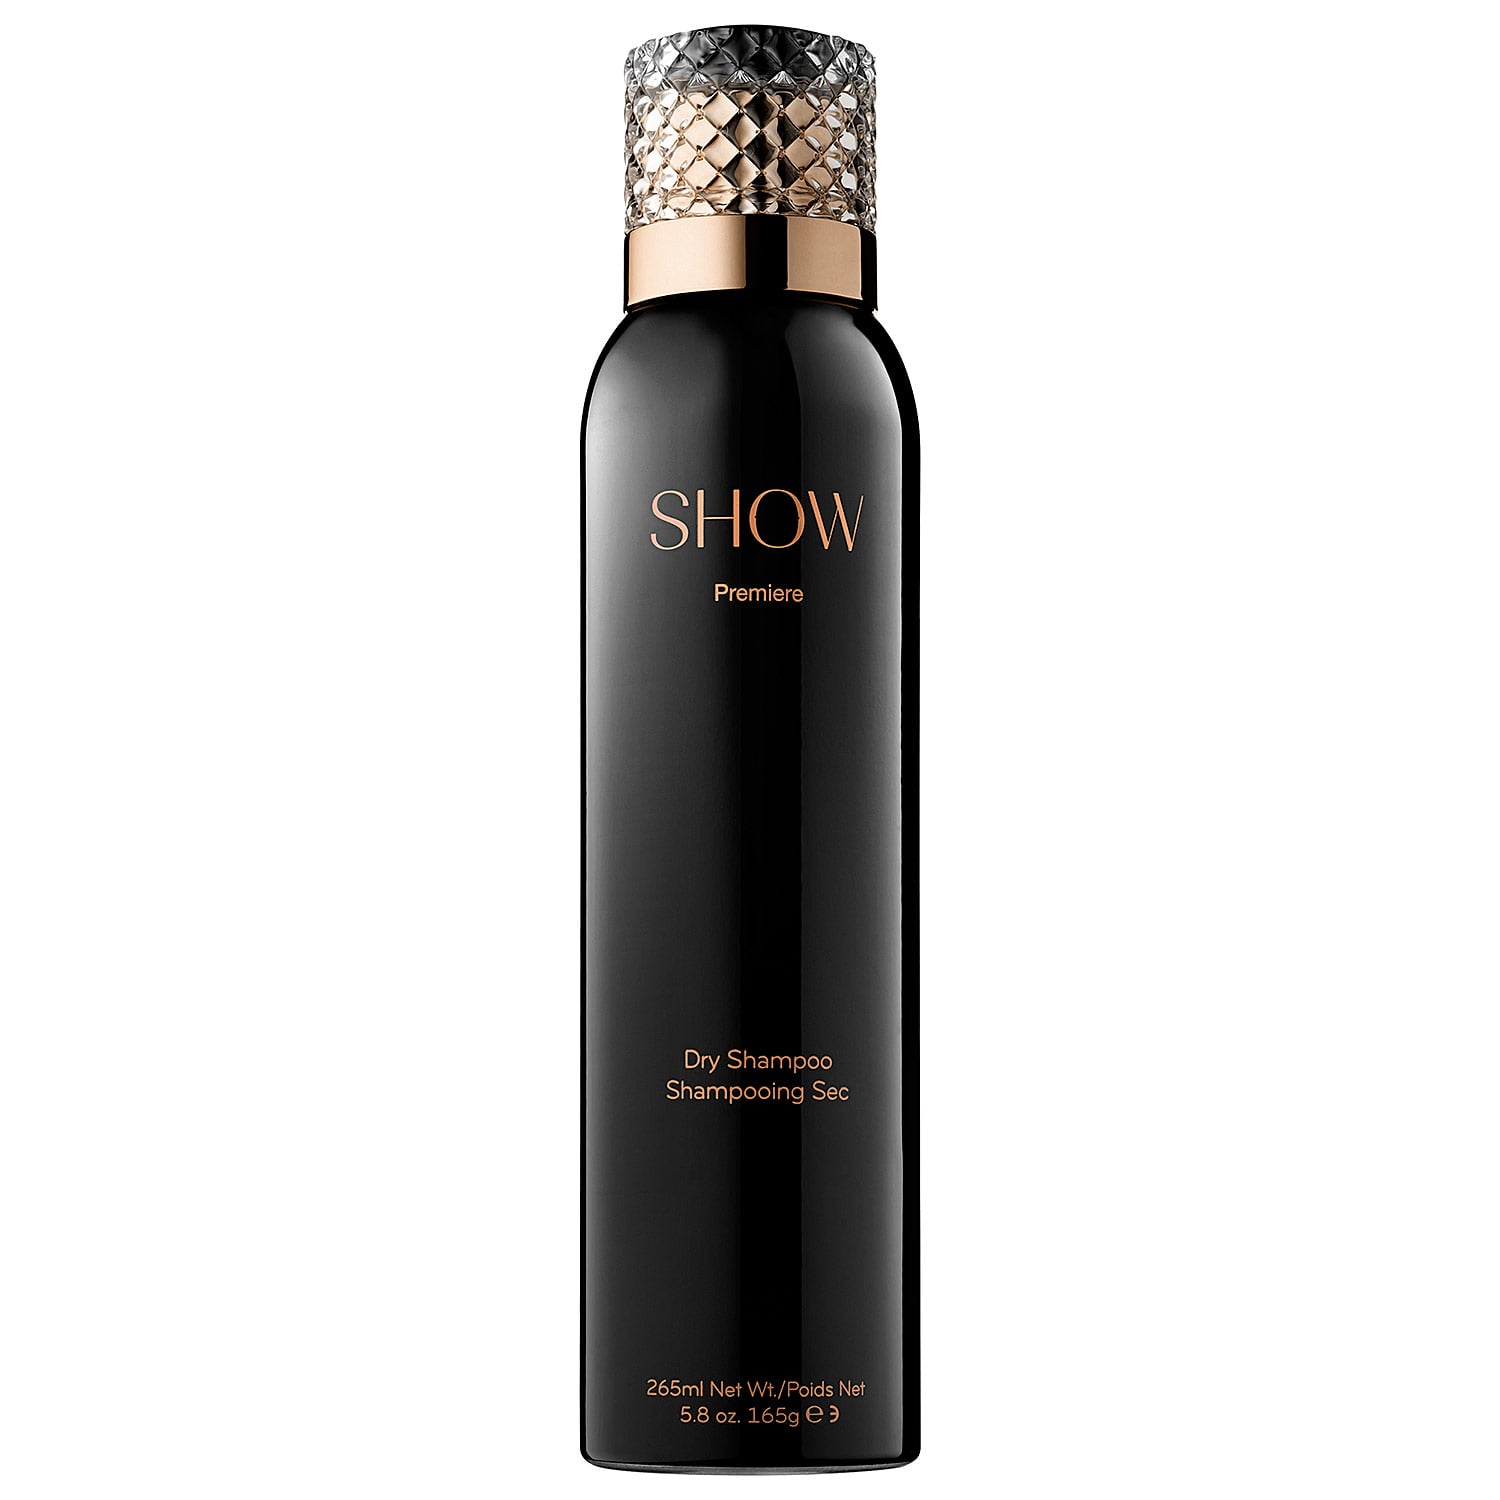 Show Beauty Premiere Dry Shampoo | Pretty Products Every Power Lady Should Keep at Her Desk | POPSUGAR Beauty Photo